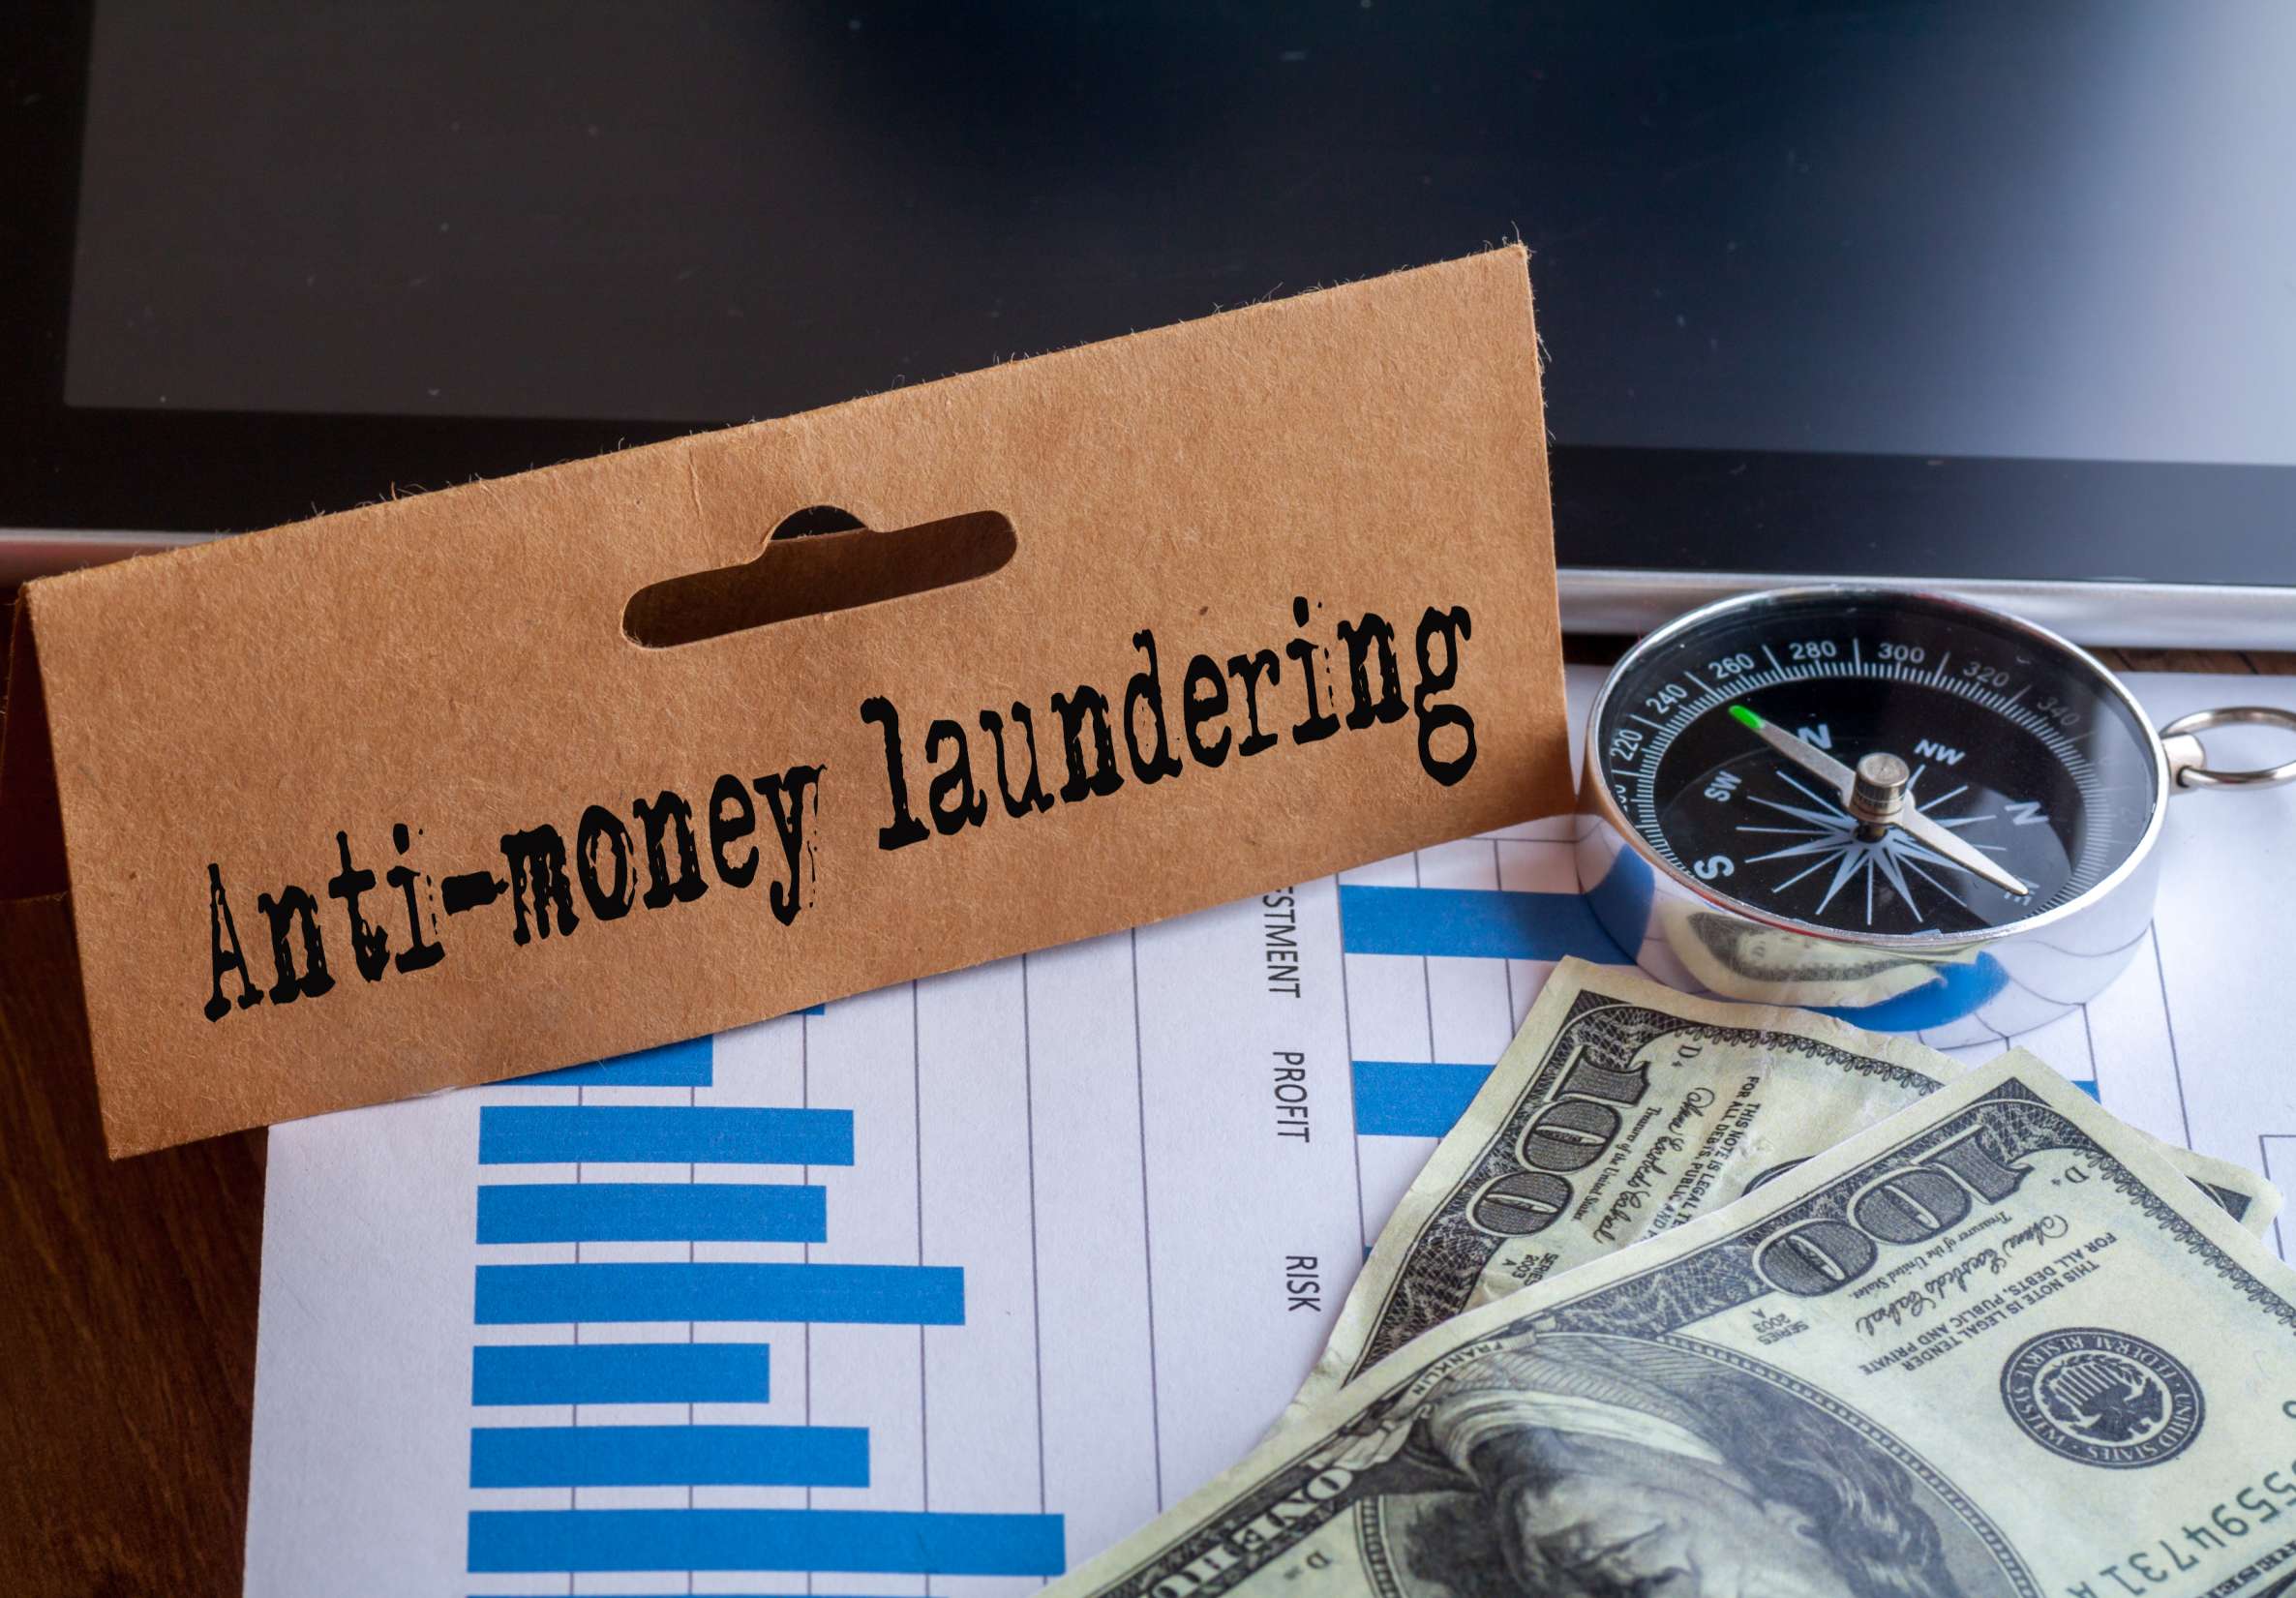 Anti-Money Laundering and its compliance with Financial Conduct Authority